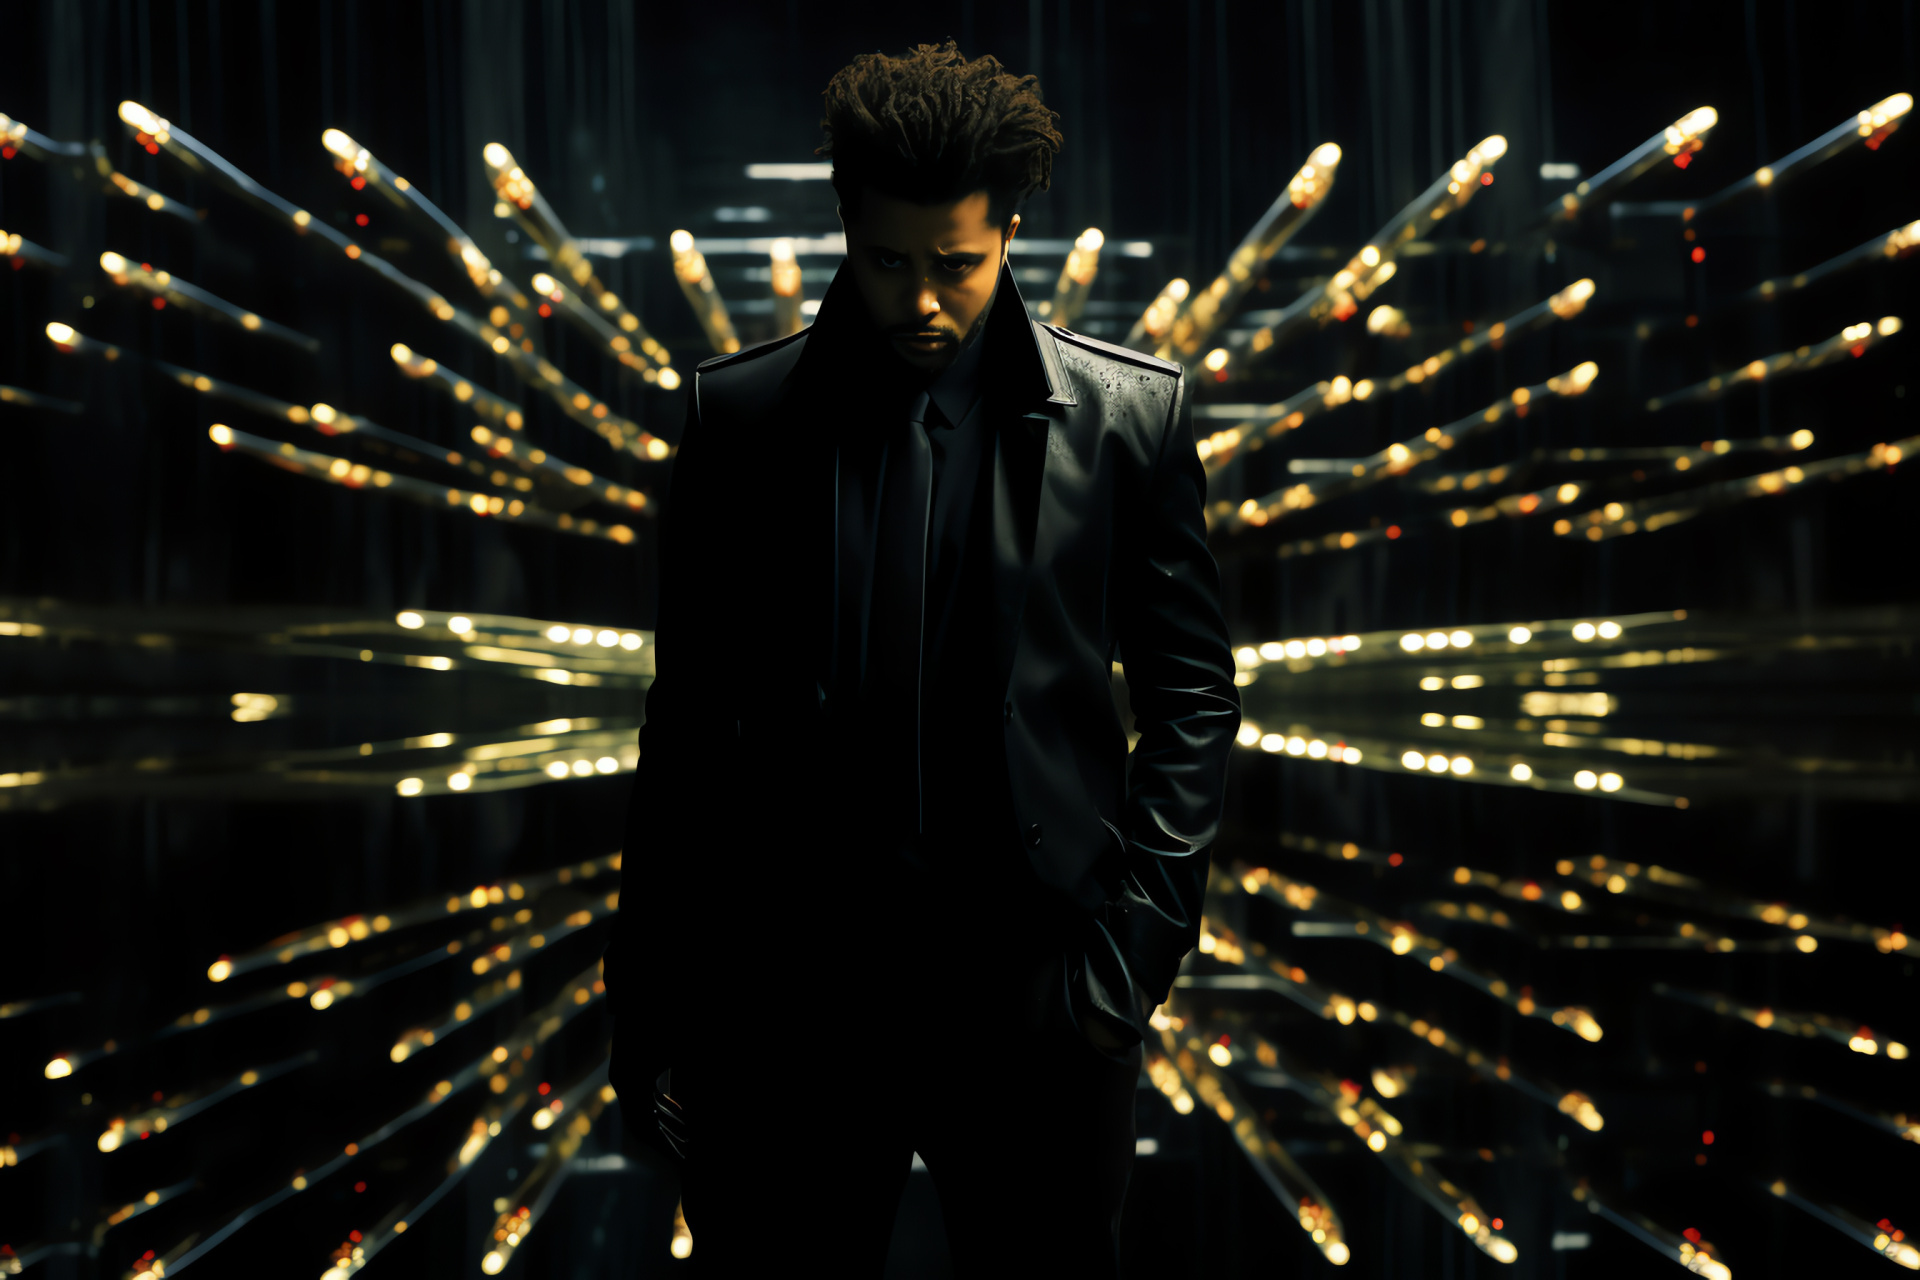 Pop artist The Weeknd, Stage identity, Performer's expression, Celebrity hairstyle, Performance wardrobe, HD Desktop Image